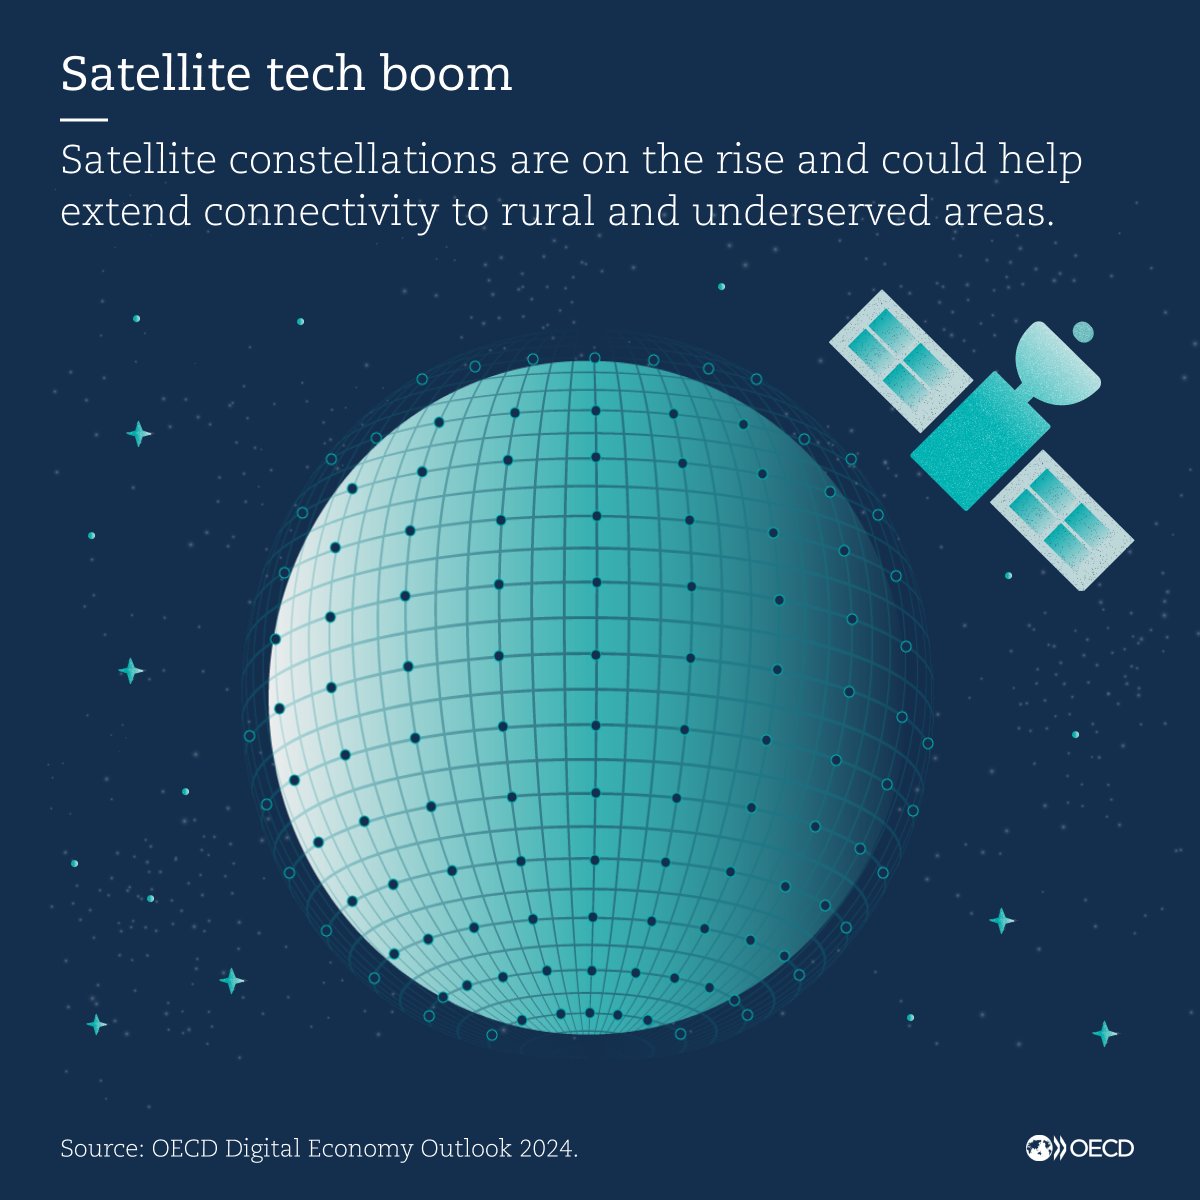 🛰️ Recent advances in #satellites could offer an alternative to wired #connectivity and extend coverage to areas where service is often unavailable. 📶 The OECD #DigitalEconomy Outlook takes a look at the role they could play in the future: oe.cd/il/deo-sp1 #OECDdigital